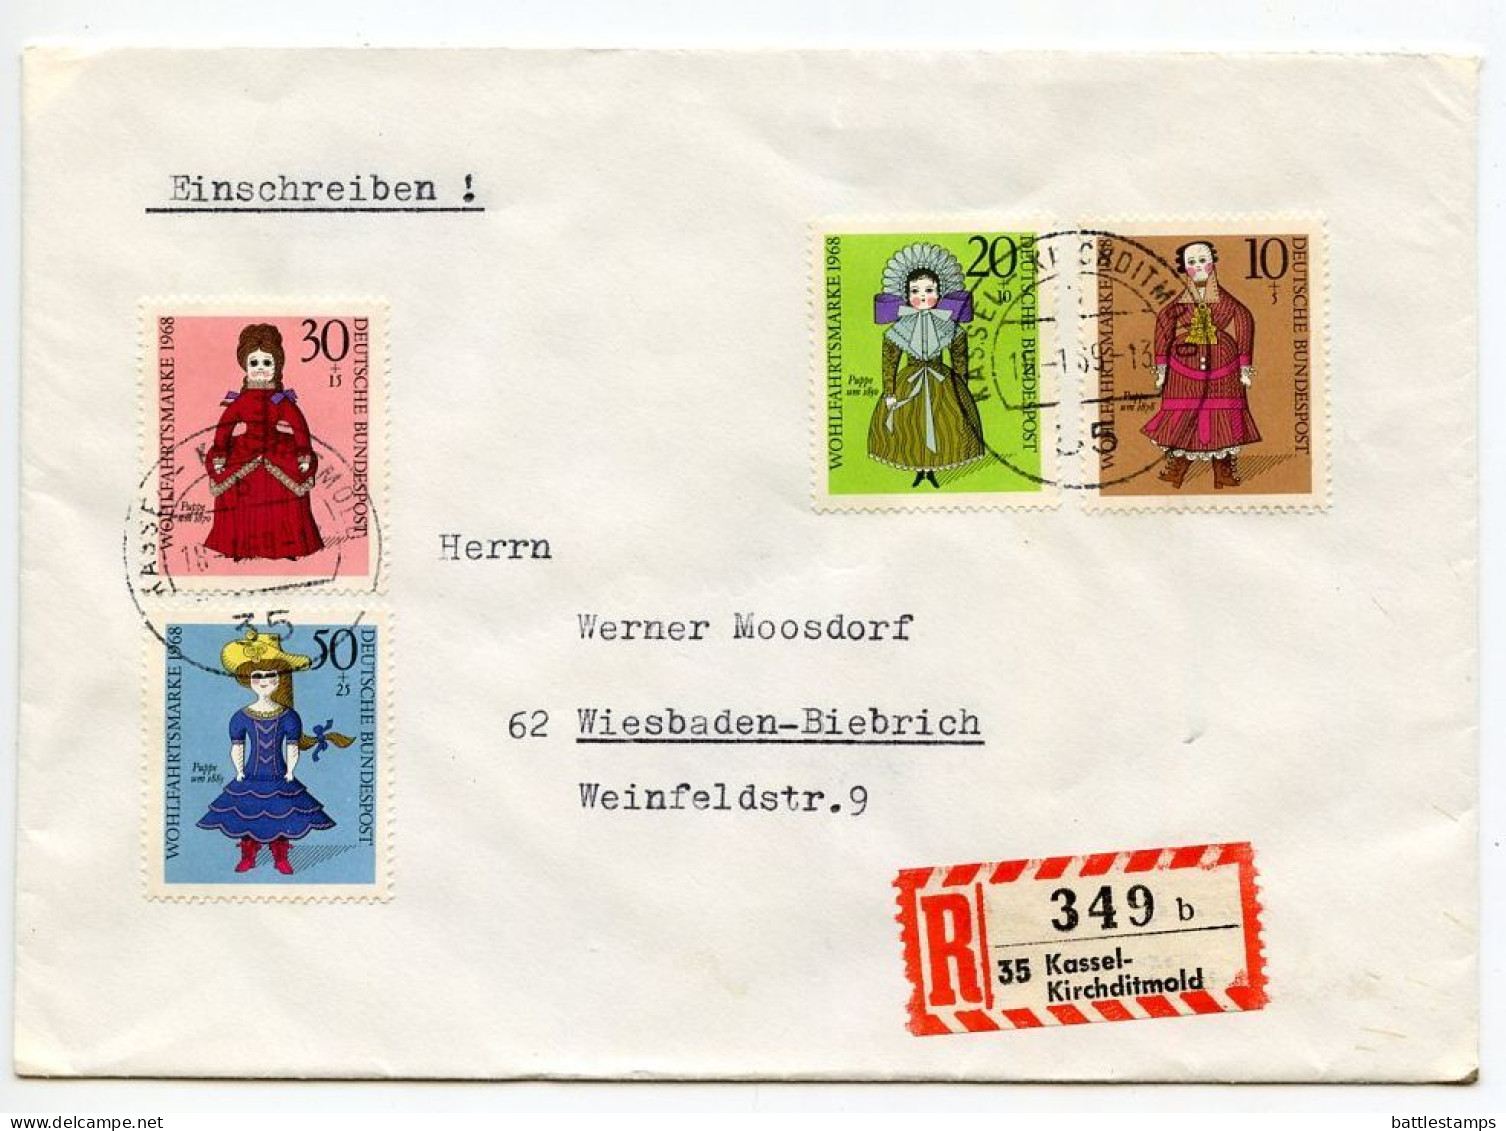 Germany, West 1969 Registered Cover Kassel-Kirchditmold To Wiesbaden-Biebrich; 19th Century Dolls Semi-Postal Stamps - Covers & Documents